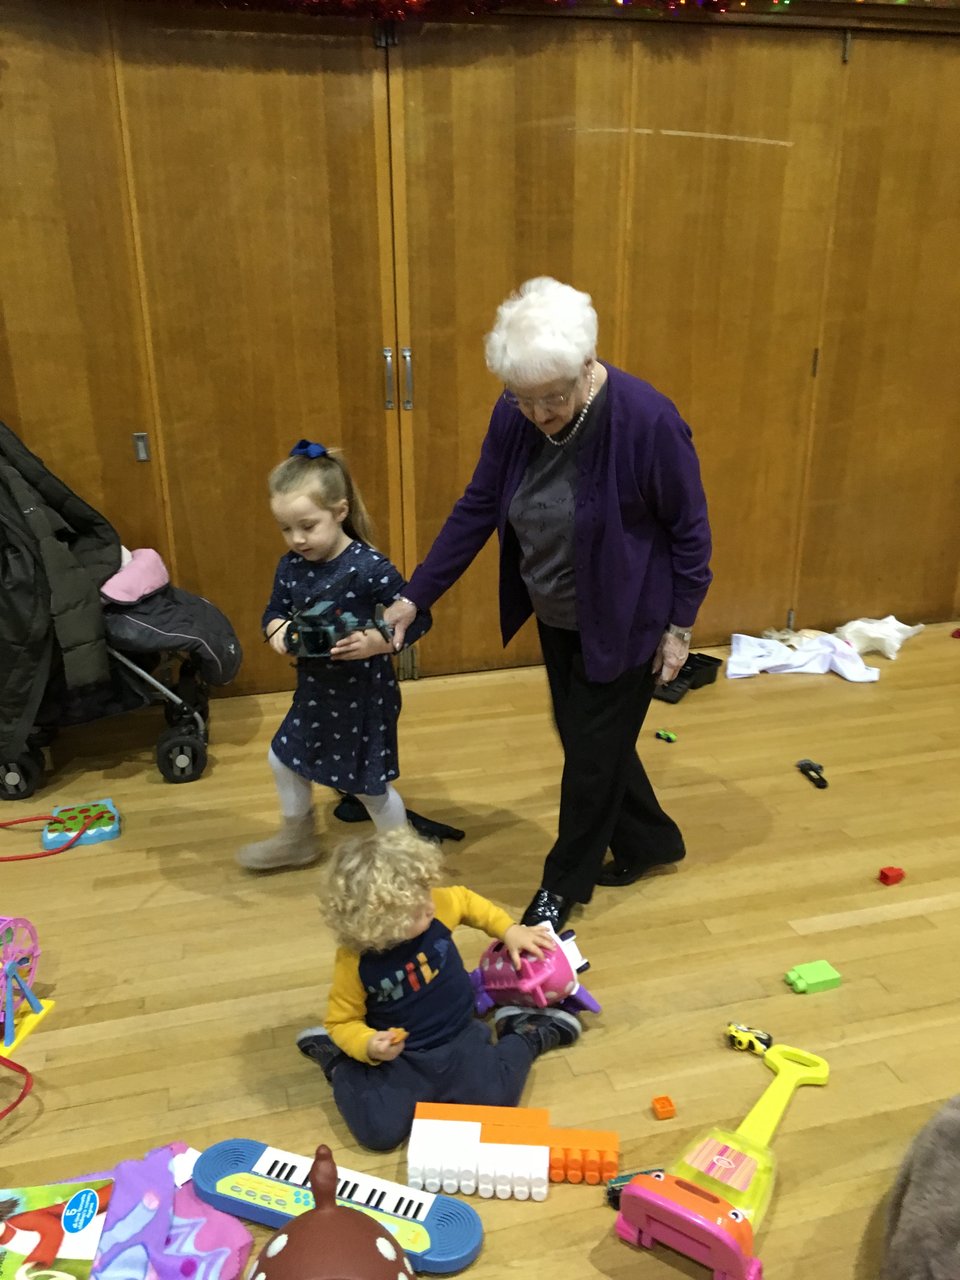 Grandma holds a child's hand as they walk around a room filled with toys